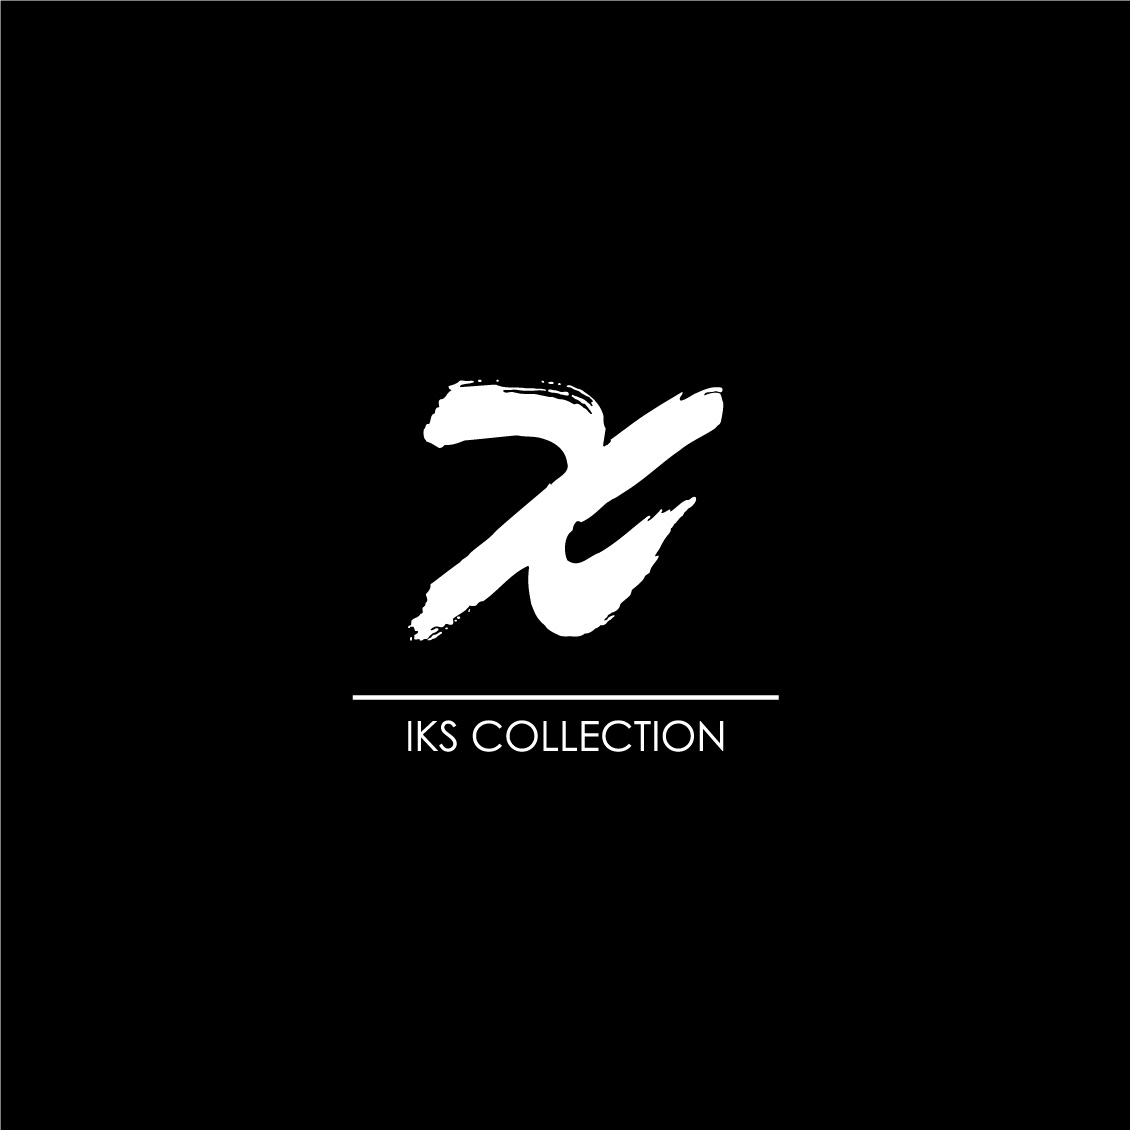 IKS COLLECTION